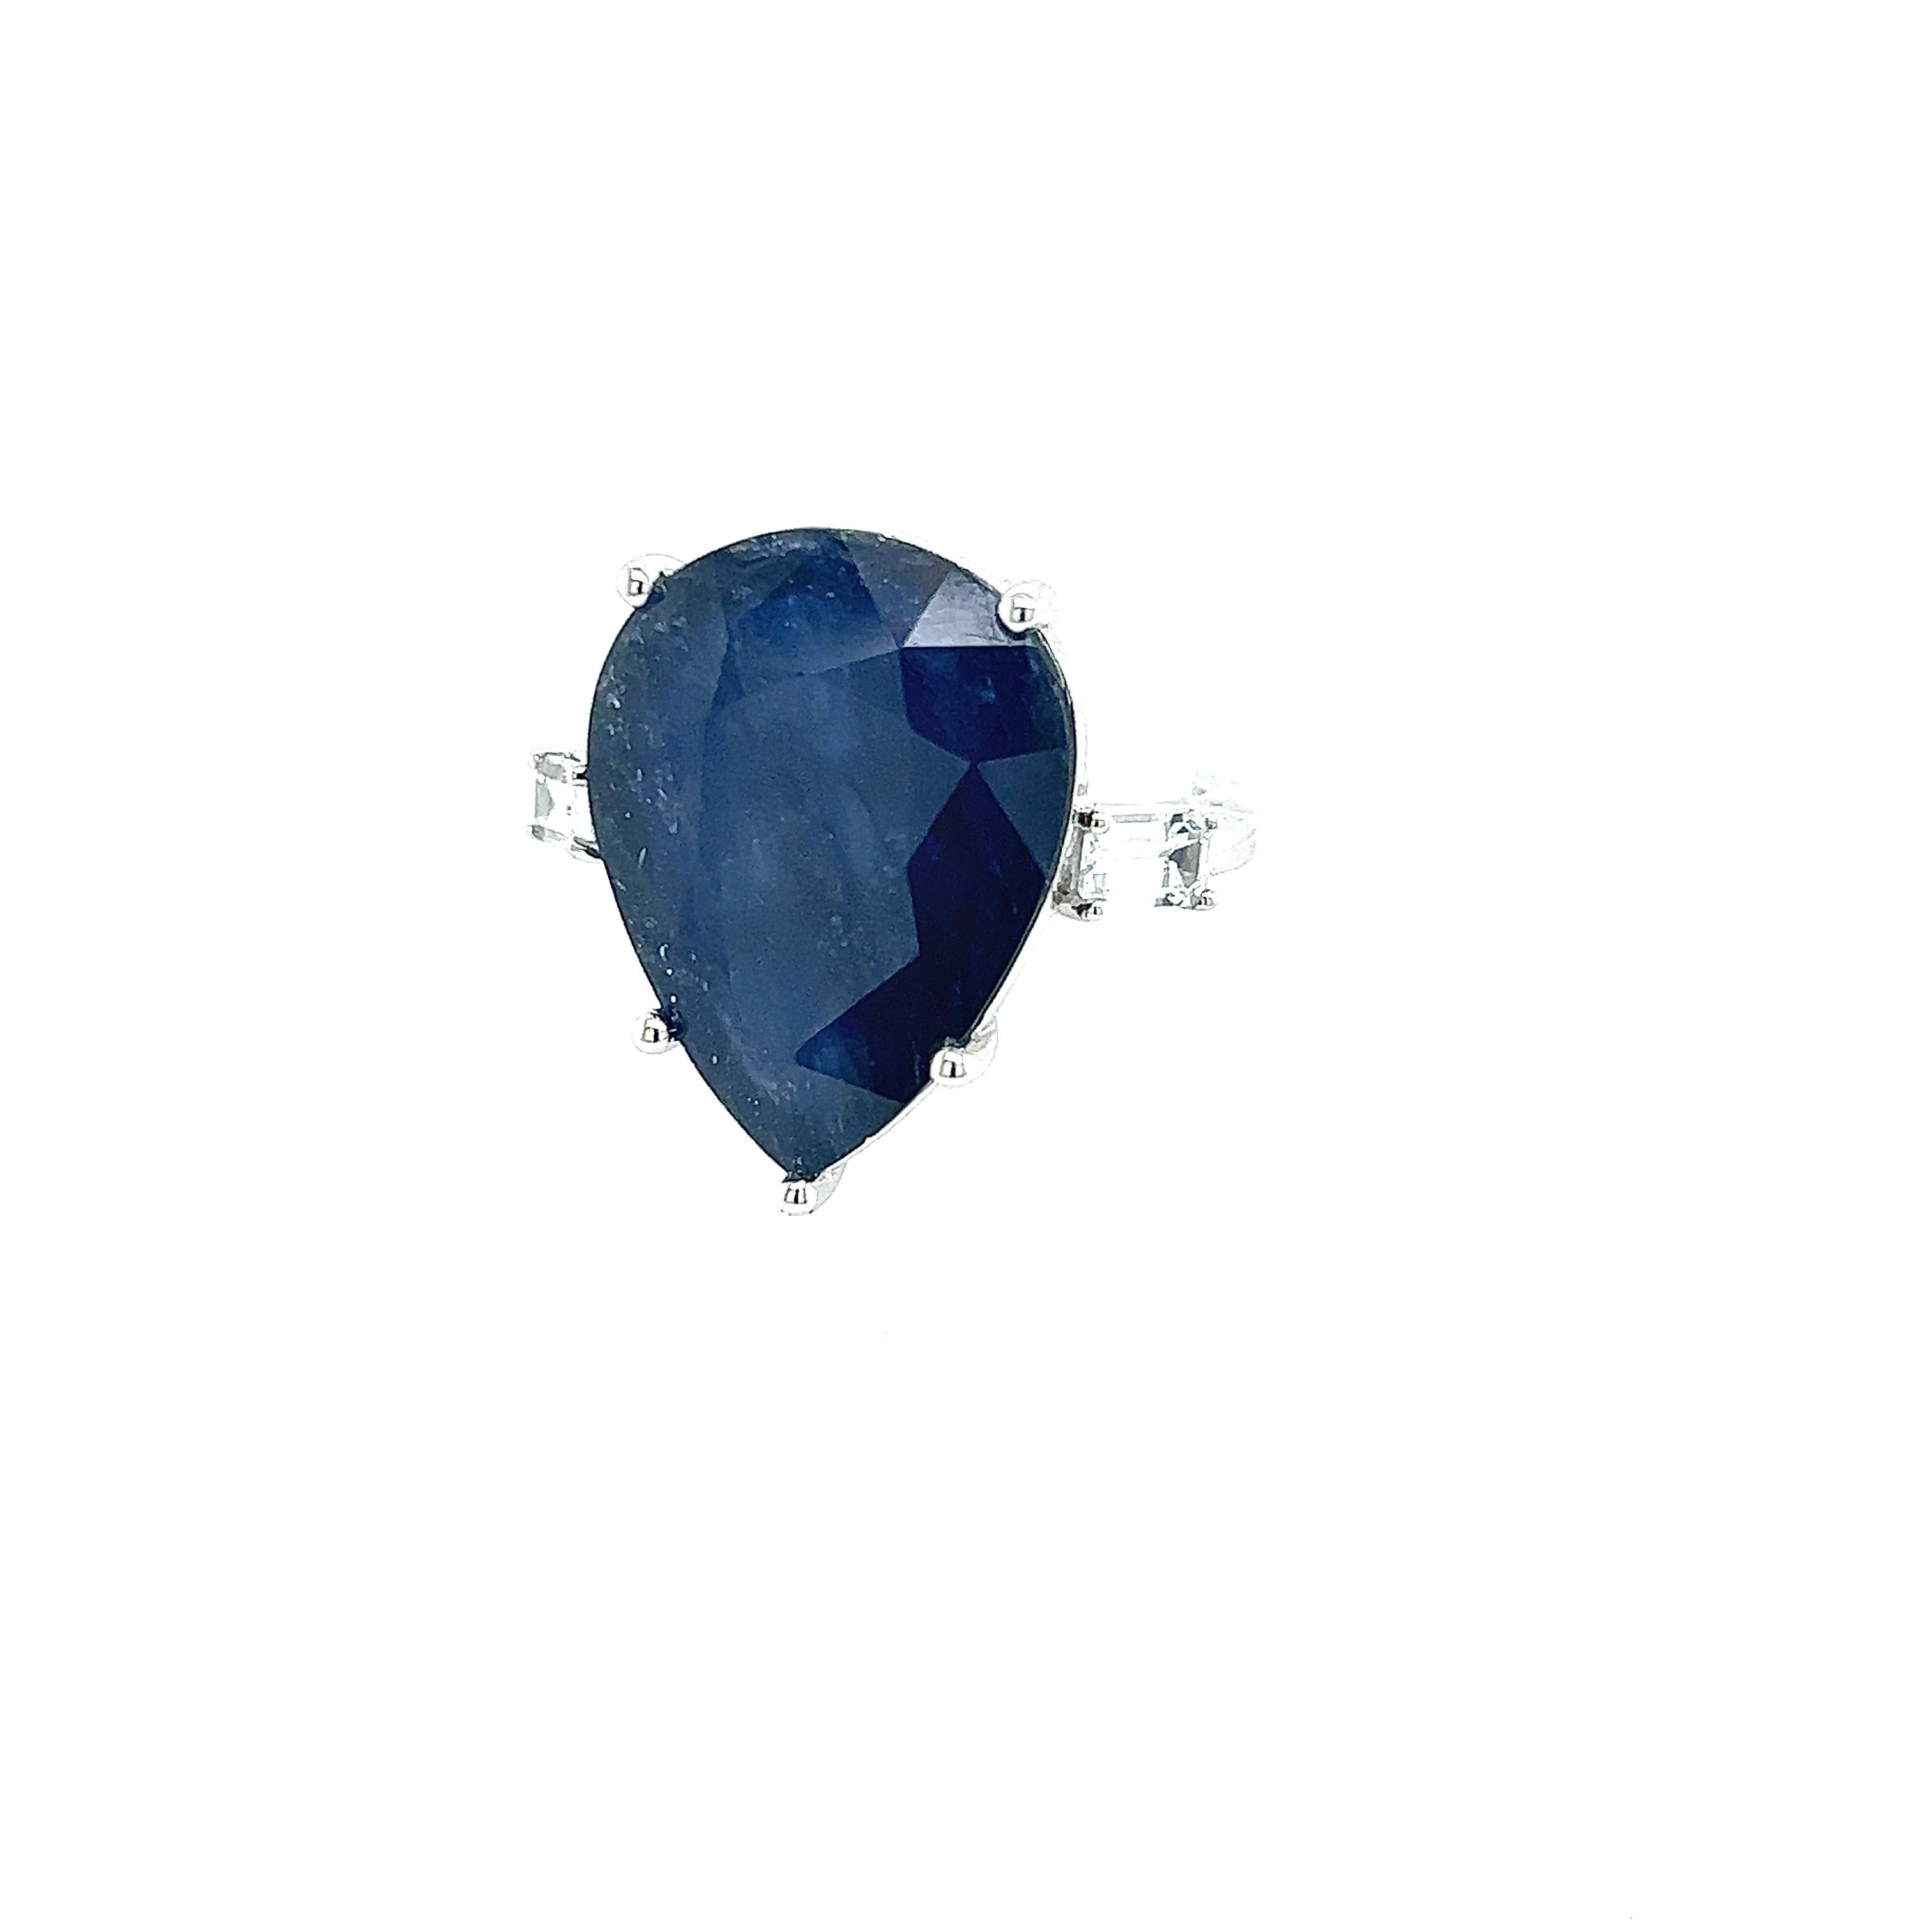 Natural Sapphire Diamond Ring Size 6.5 14k W Gold 17.73 TCW Certified For Sale 2